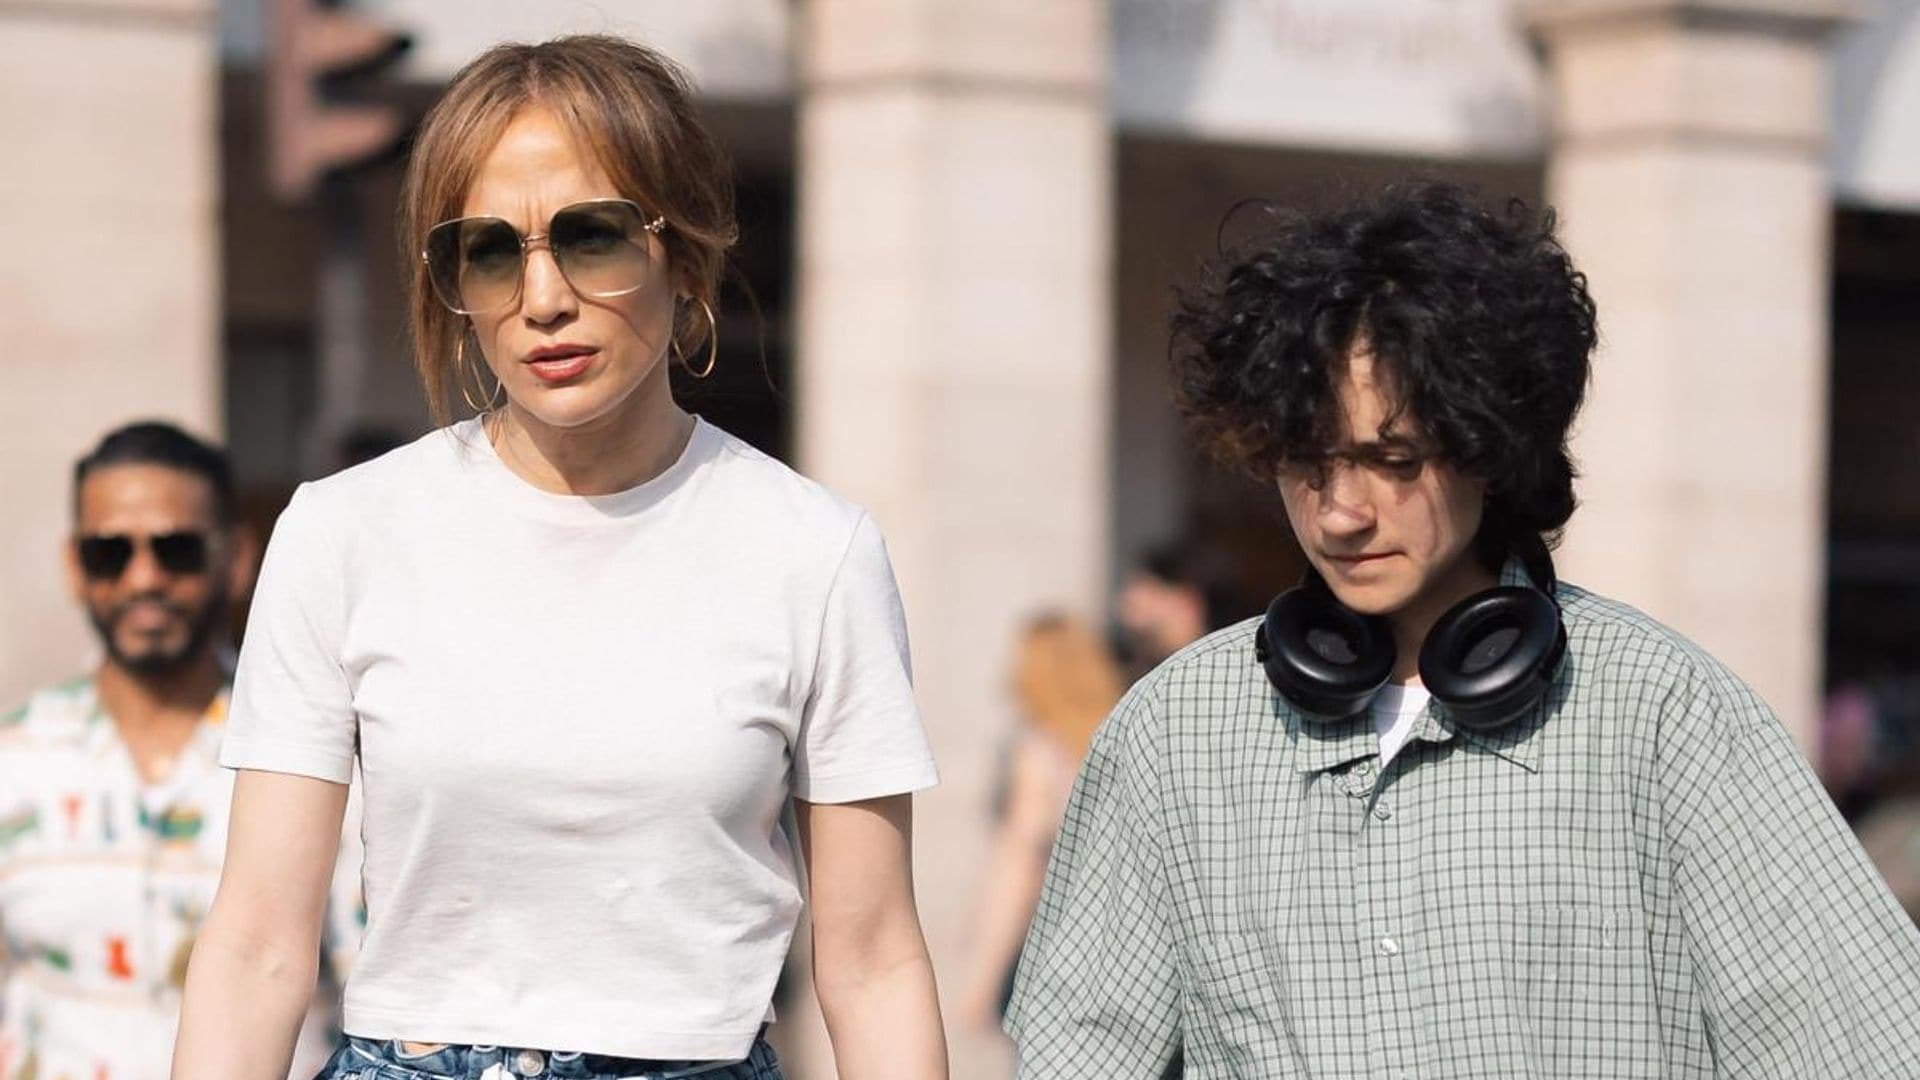 Jennifer Lopez and Emme in Paris: More photos from their amazing trip